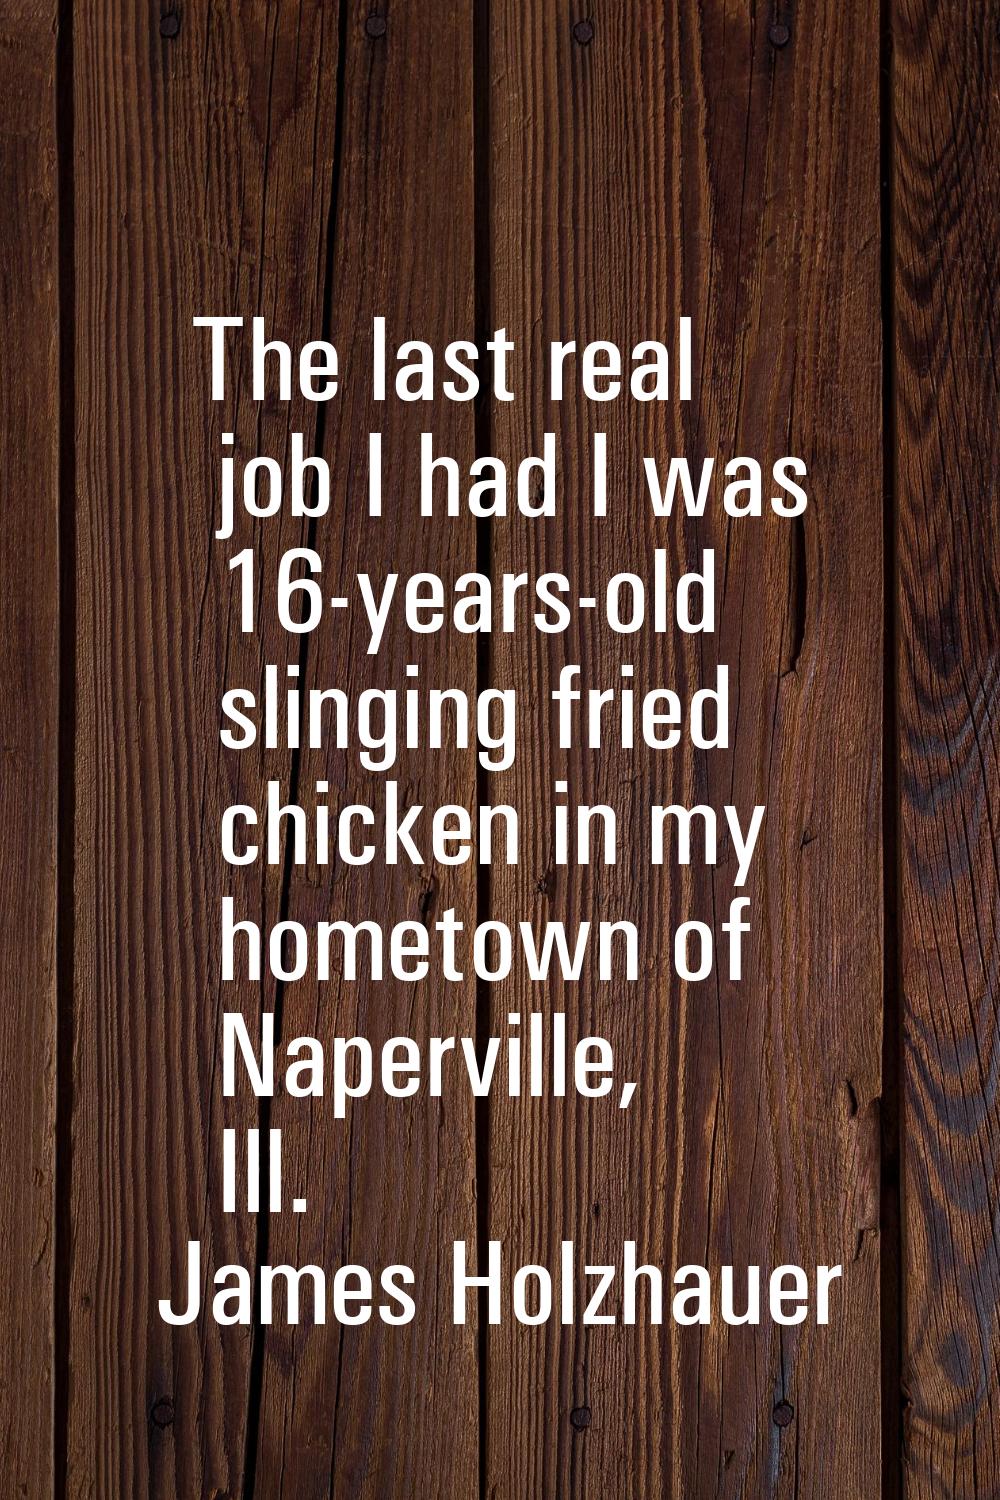 The last real job I had I was 16-years-old slinging fried chicken in my hometown of Naperville, Ill